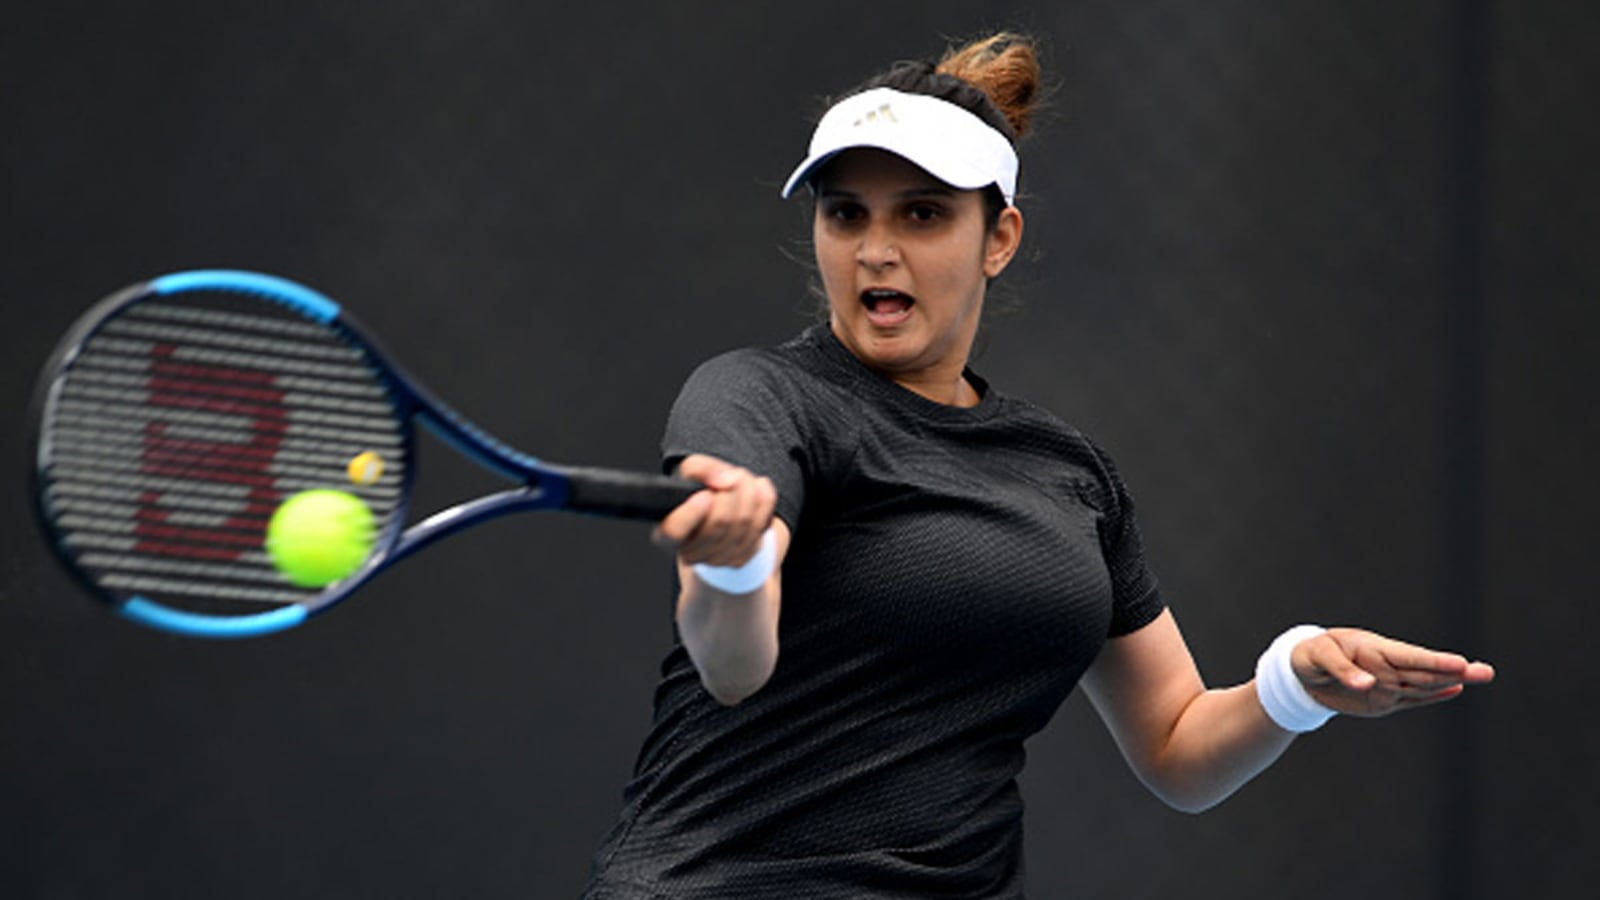 Xx Sania - For Sania Mirza, belief to take on the best is what matters most | Tennis  News - Hindustan Times